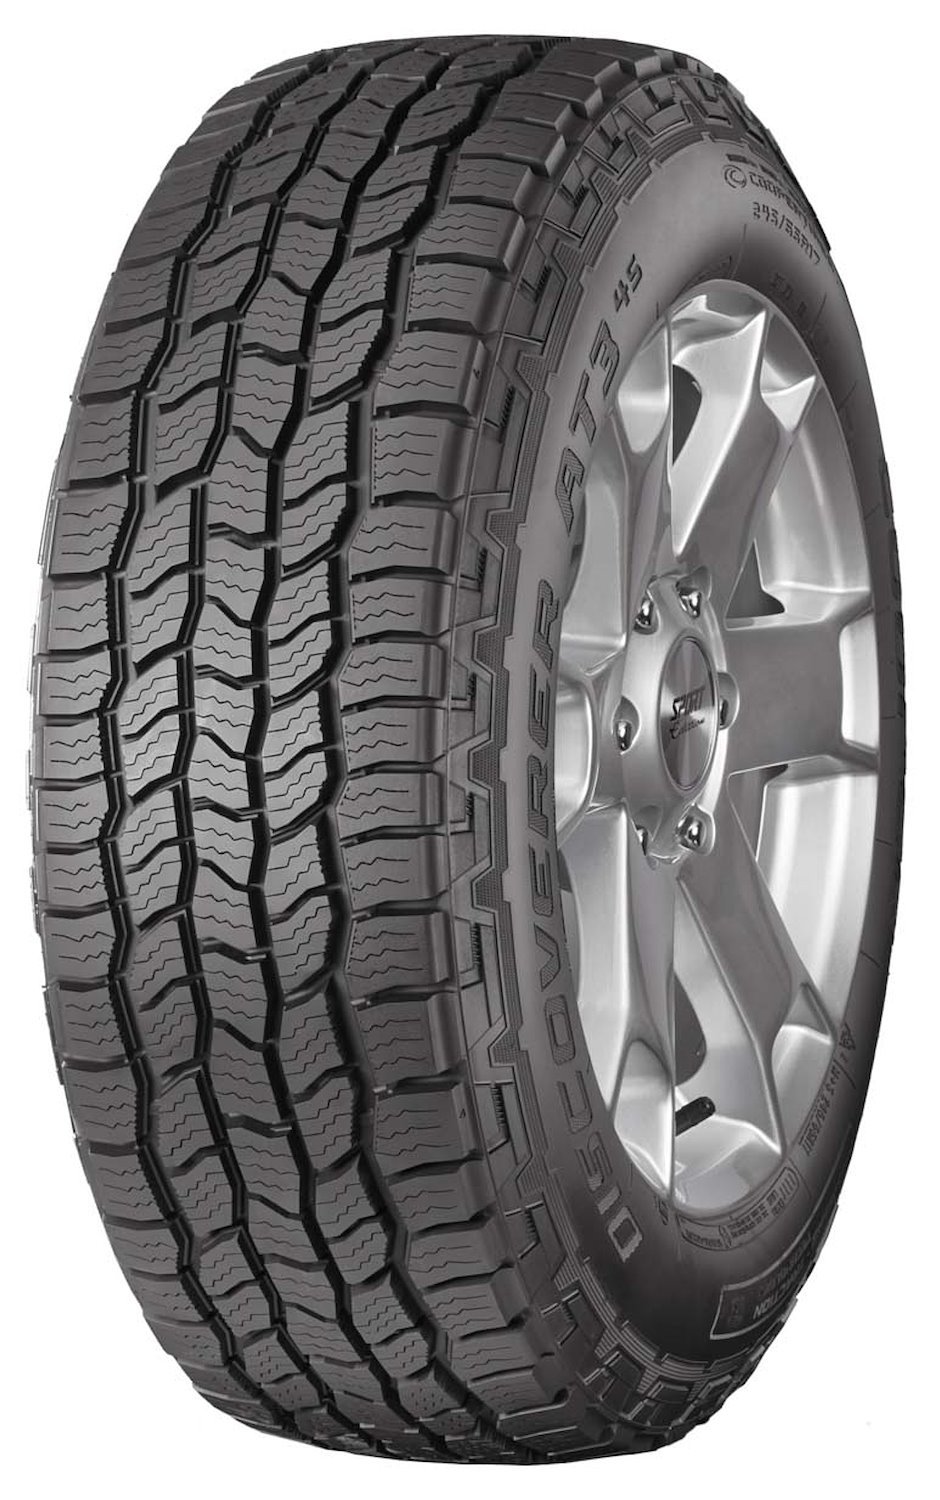 Discoverer AT3 4S All-Terrain Tire, 215/70R16